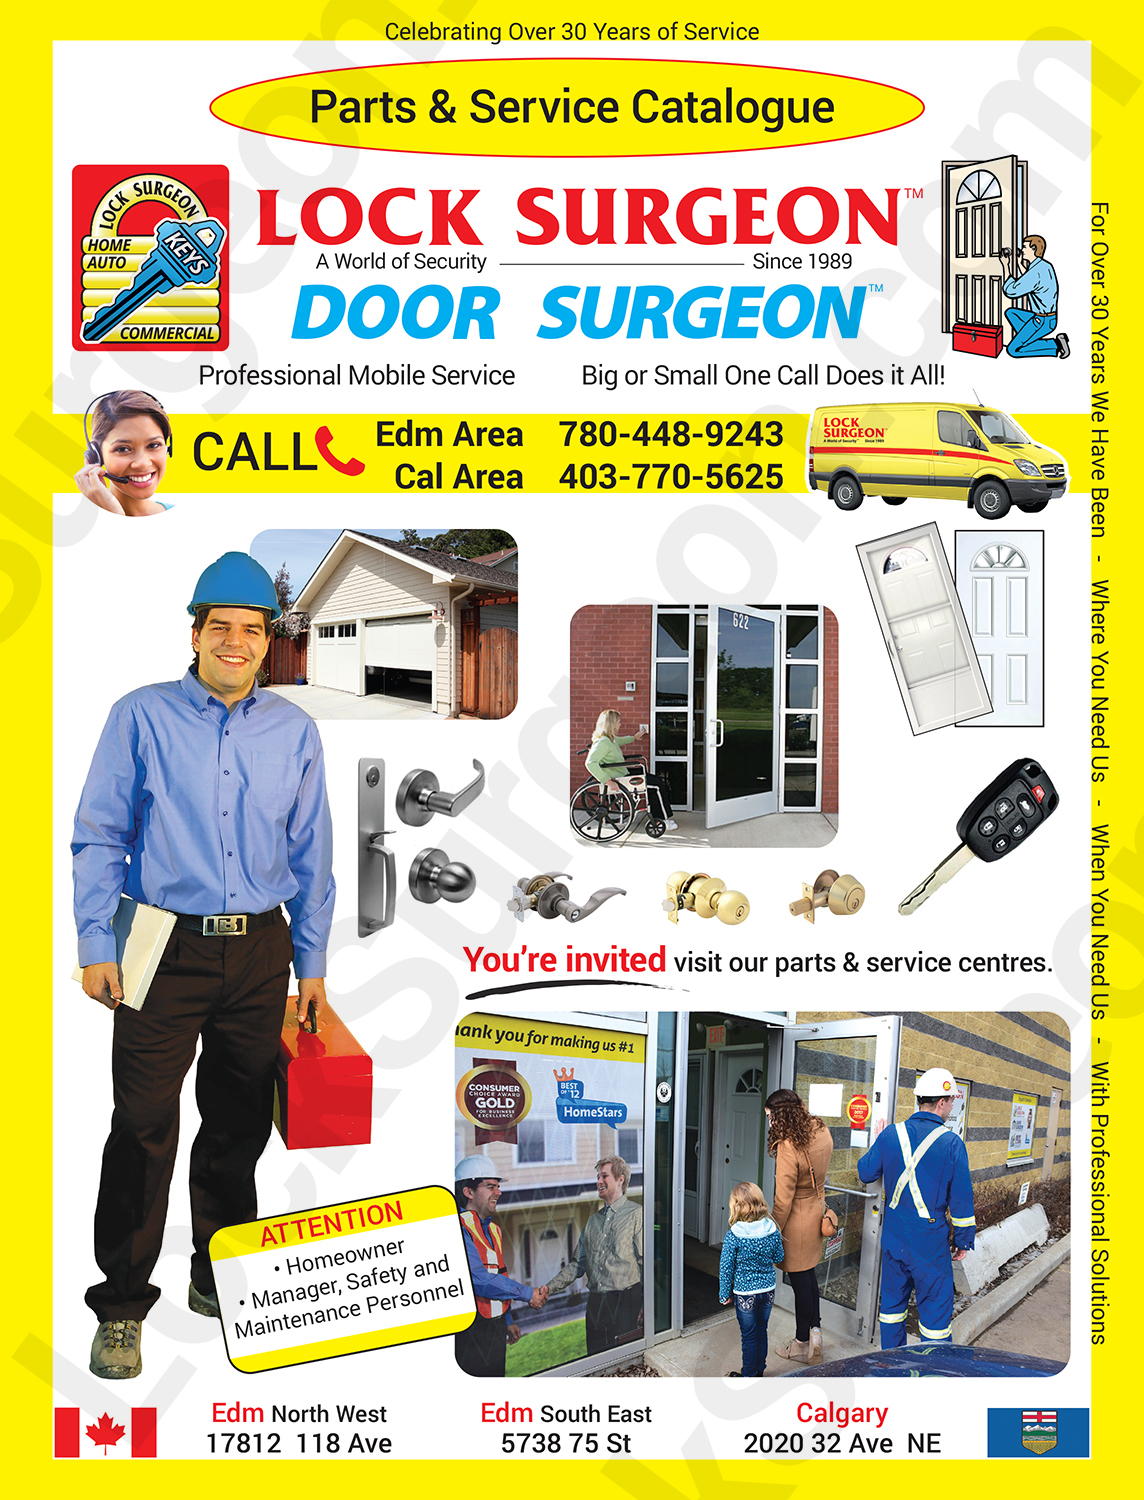 Lock Surgeon service centres staffed with trained locksmiths security solutions locking hardware.